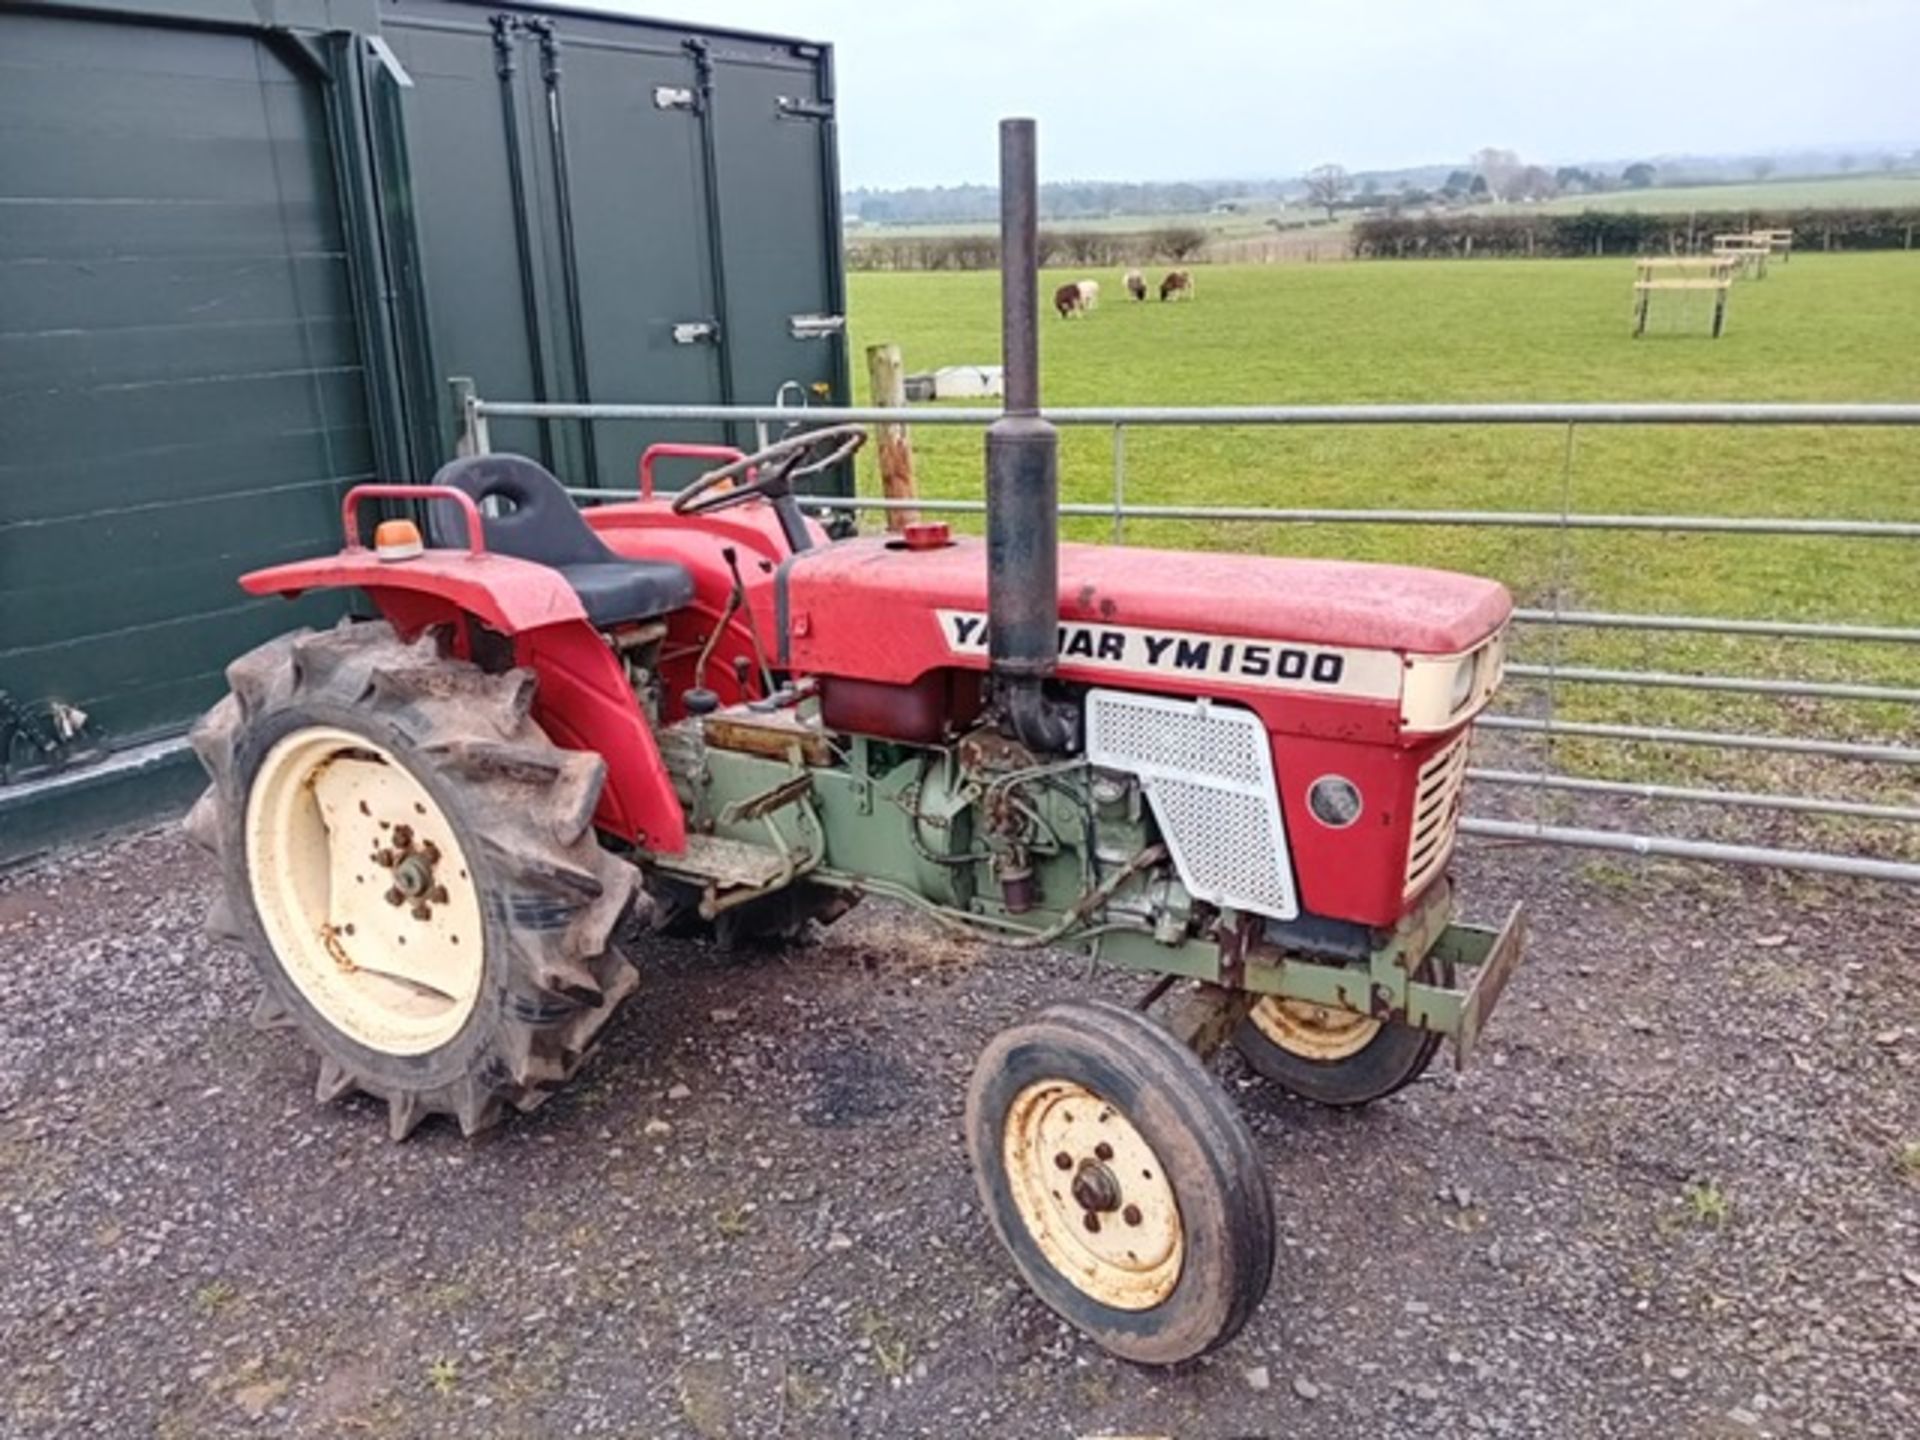 YANMAR YM1500 TRACTOR. 2WD. STARTS AND D